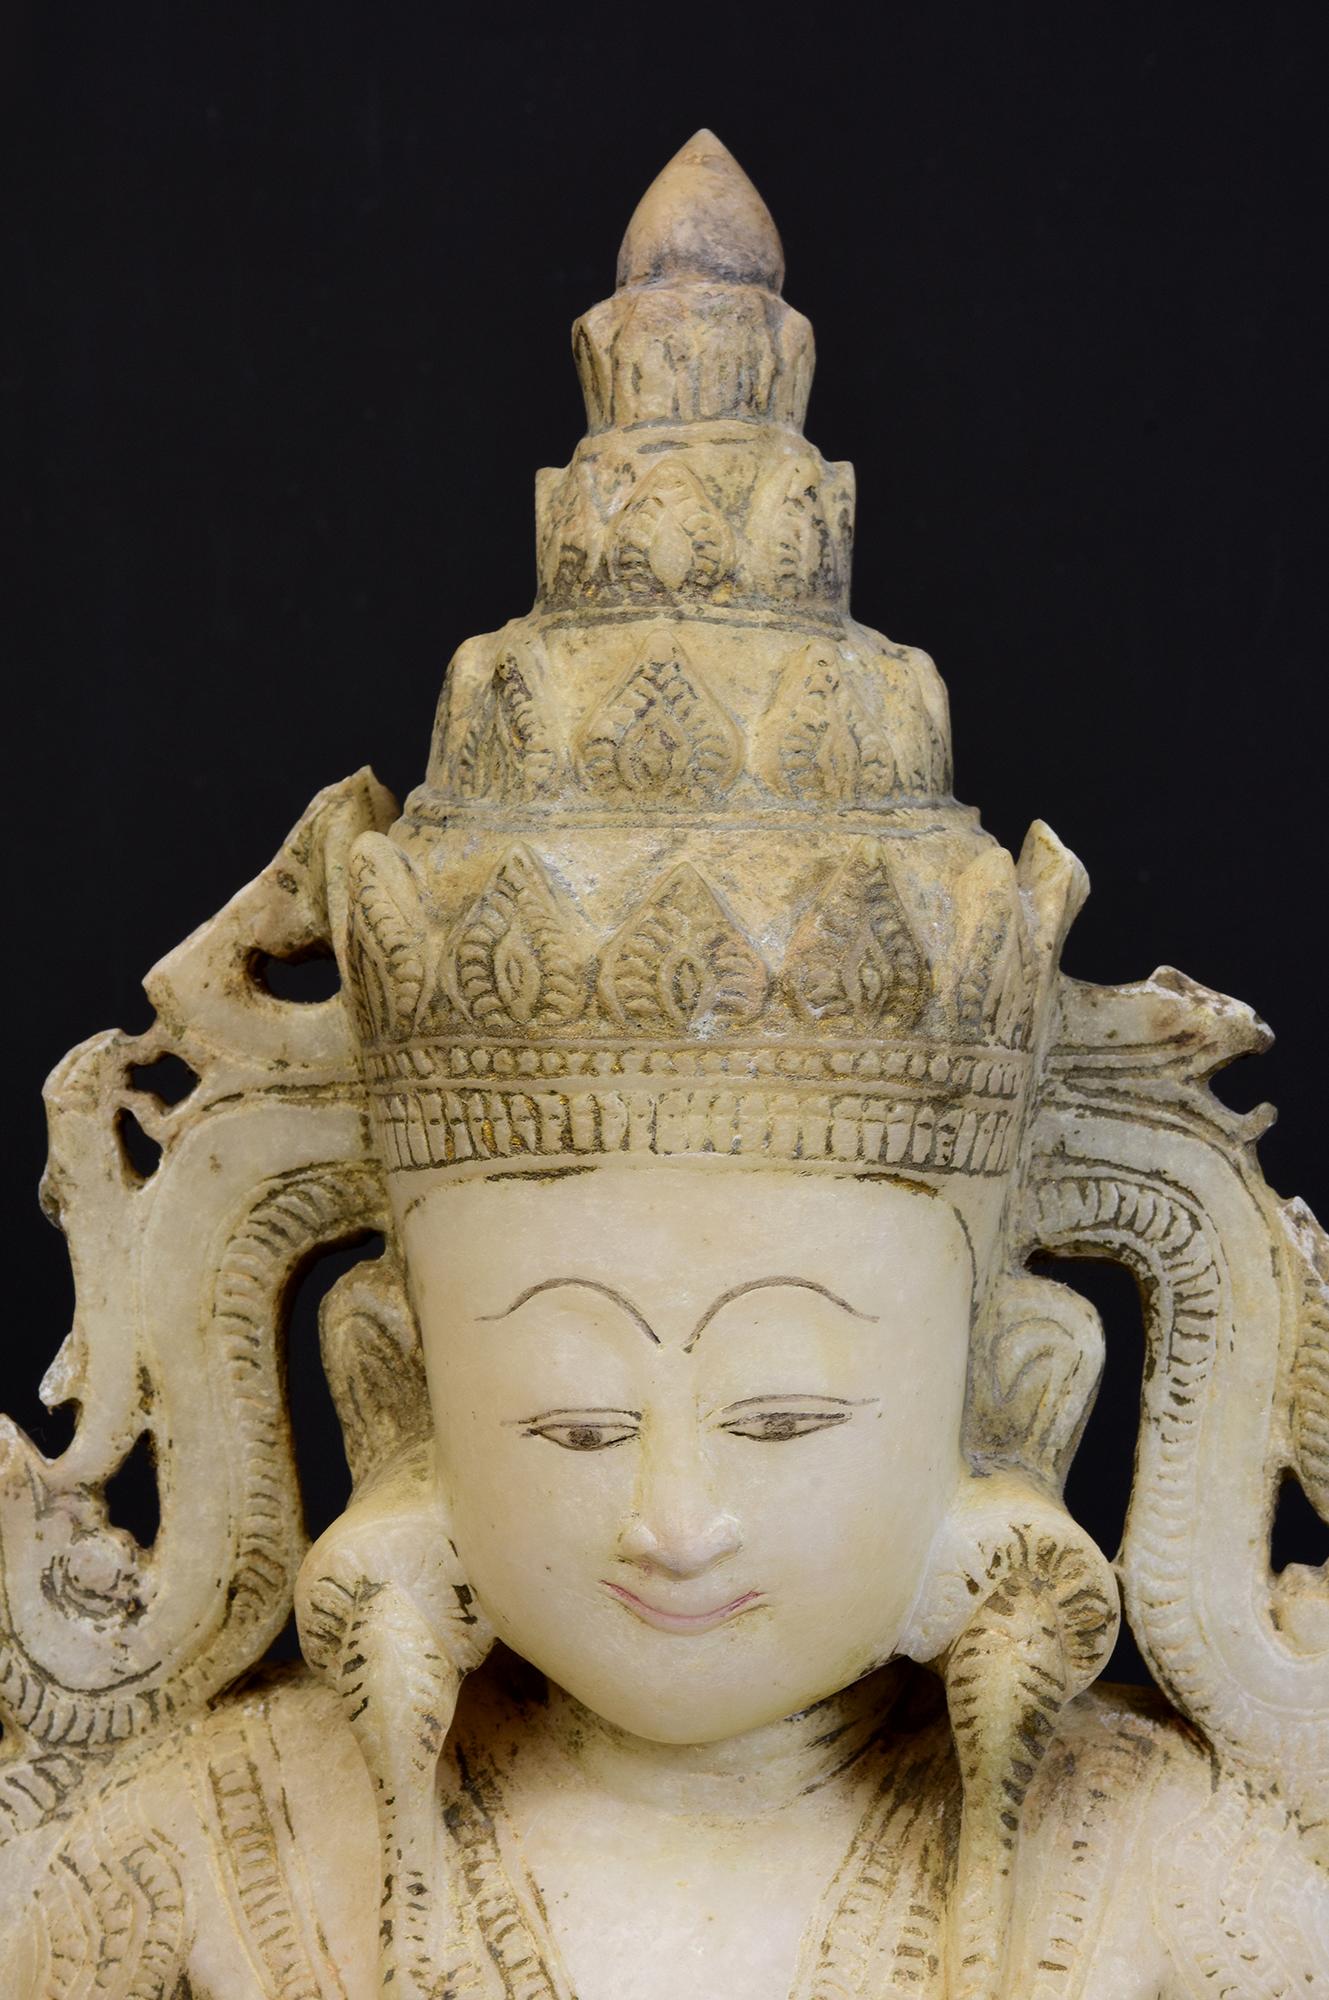 Hand-Carved 18th C., Shan, Rare Antique Burmese Alabaster Marble Seated King Buddha Statue For Sale